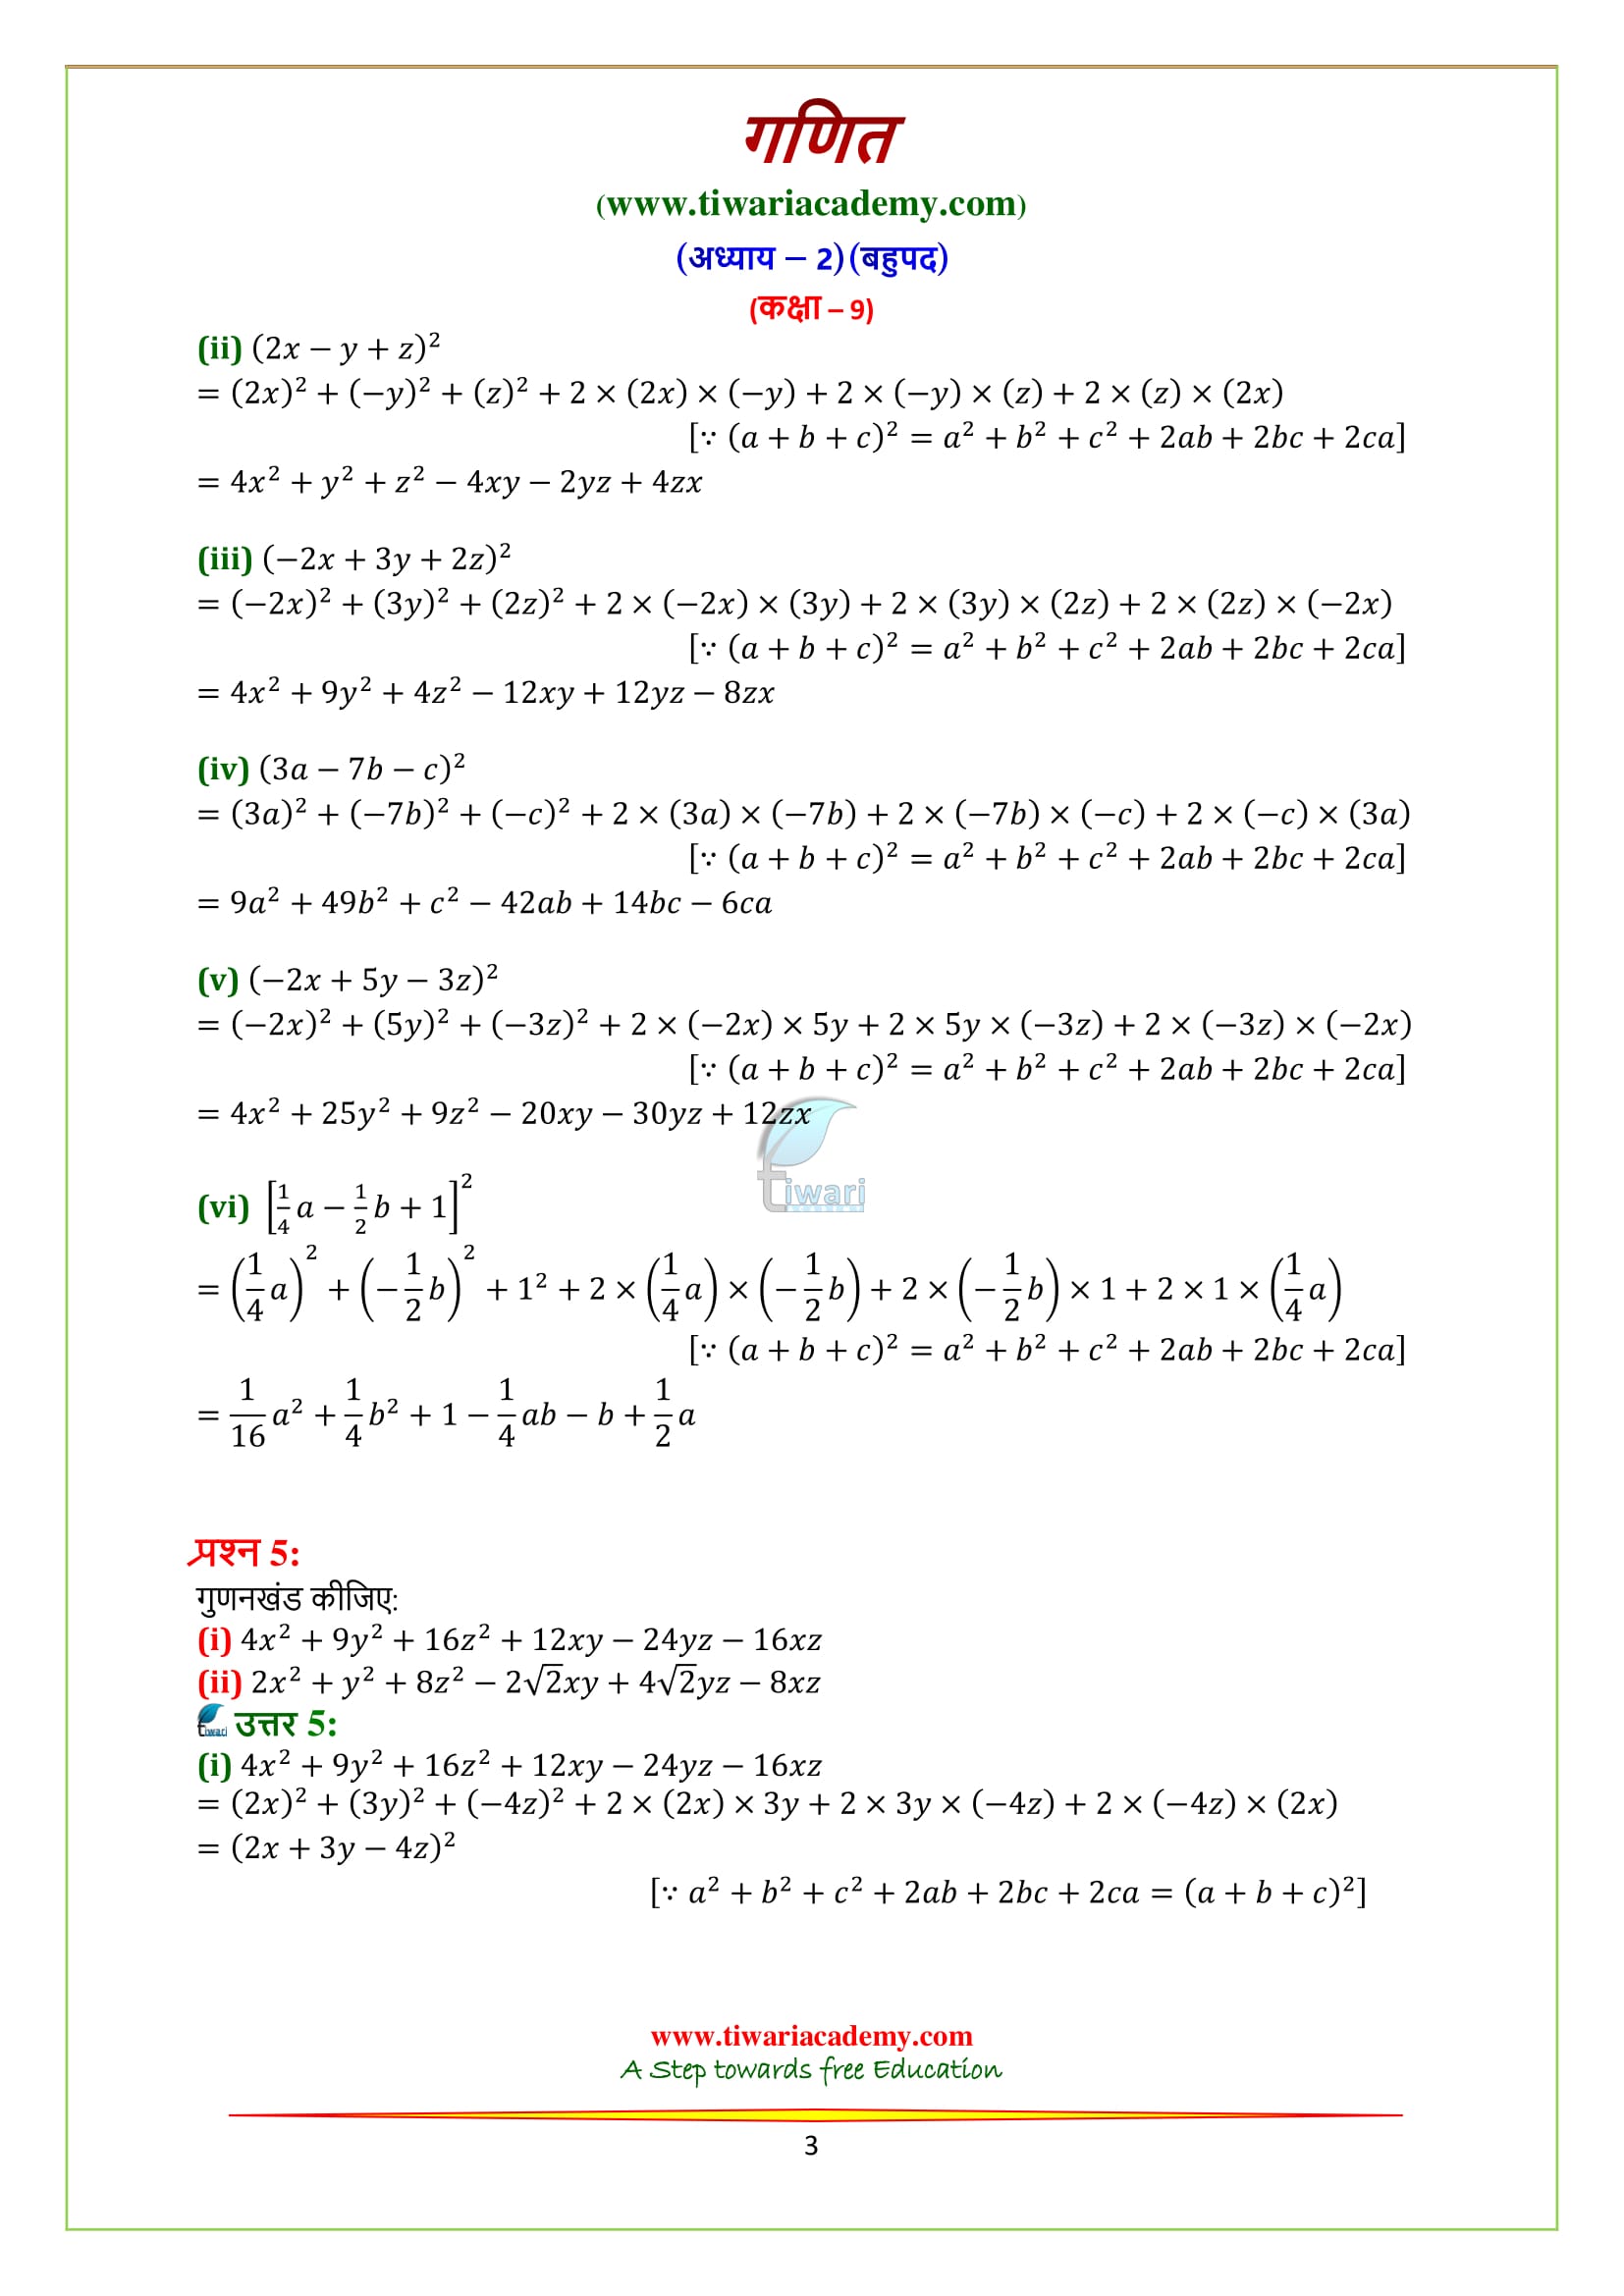 NCERT Solutions for class 9 Maths chapter 2 exercise 2.5 Hindi medium